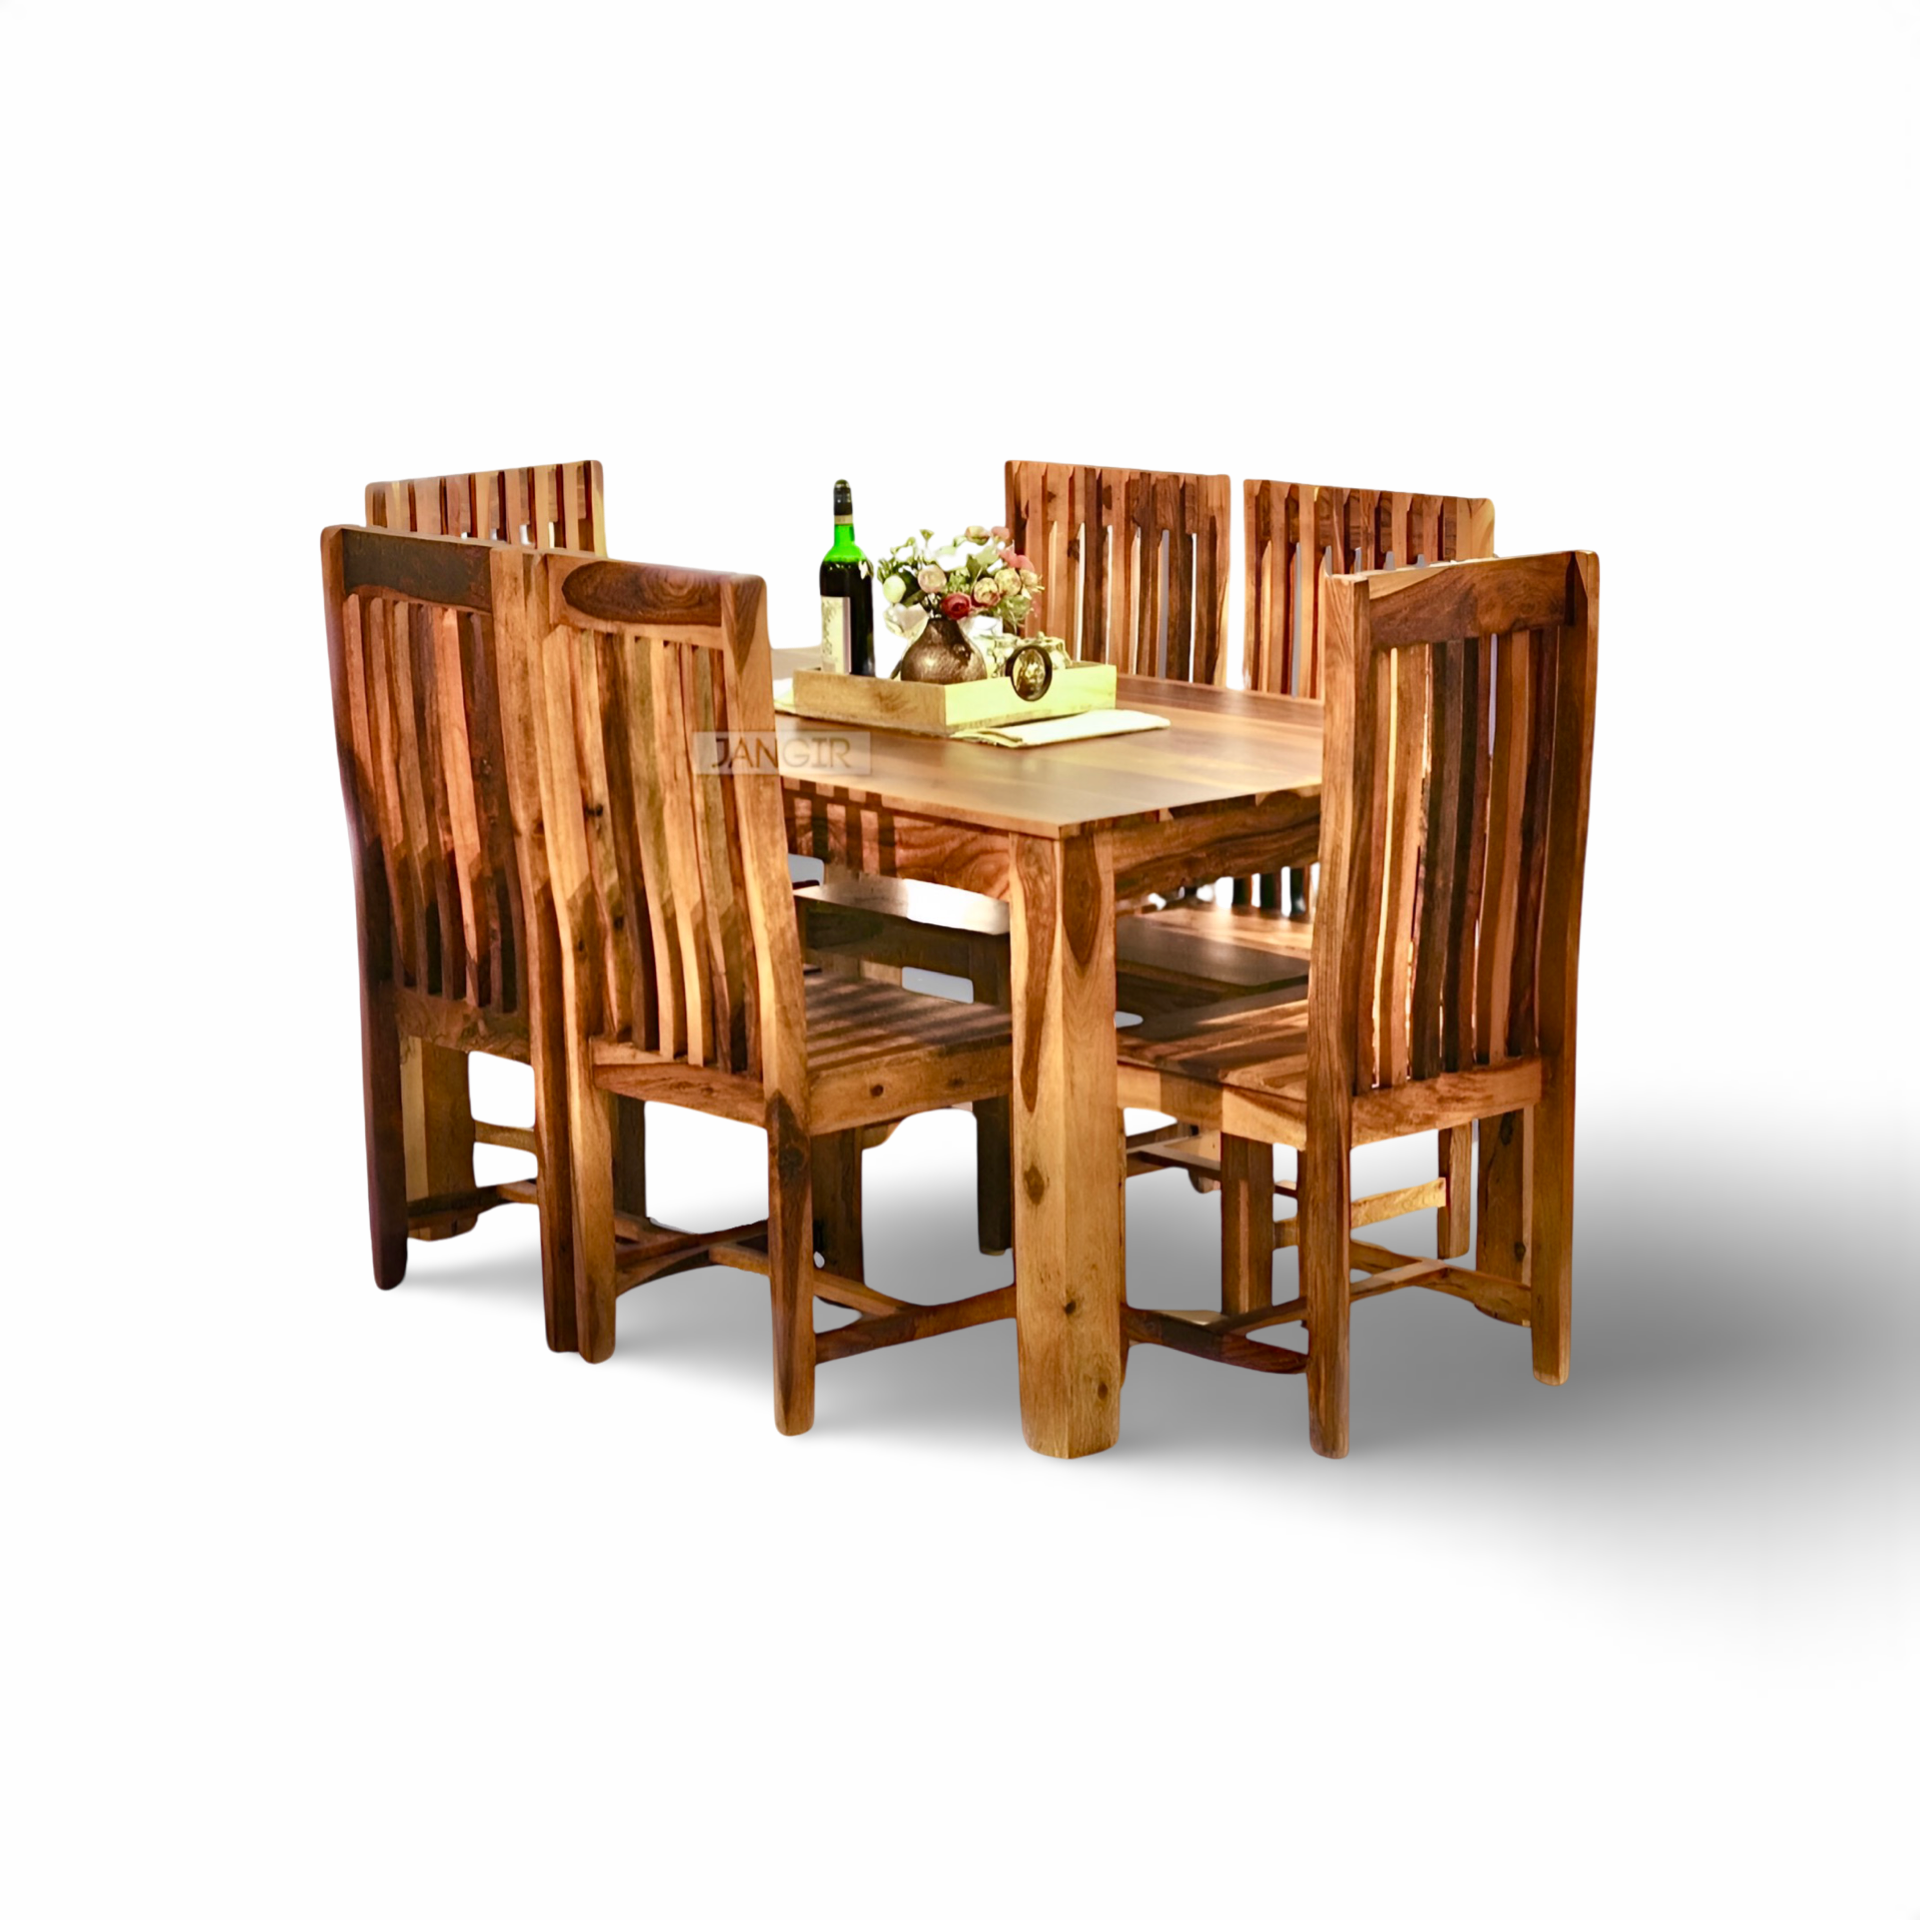 Bring home styles that last with this modern Red Dining Set. Crafted from Sheesham wood. Buy four and six seater dining table set near you in Bangalore today